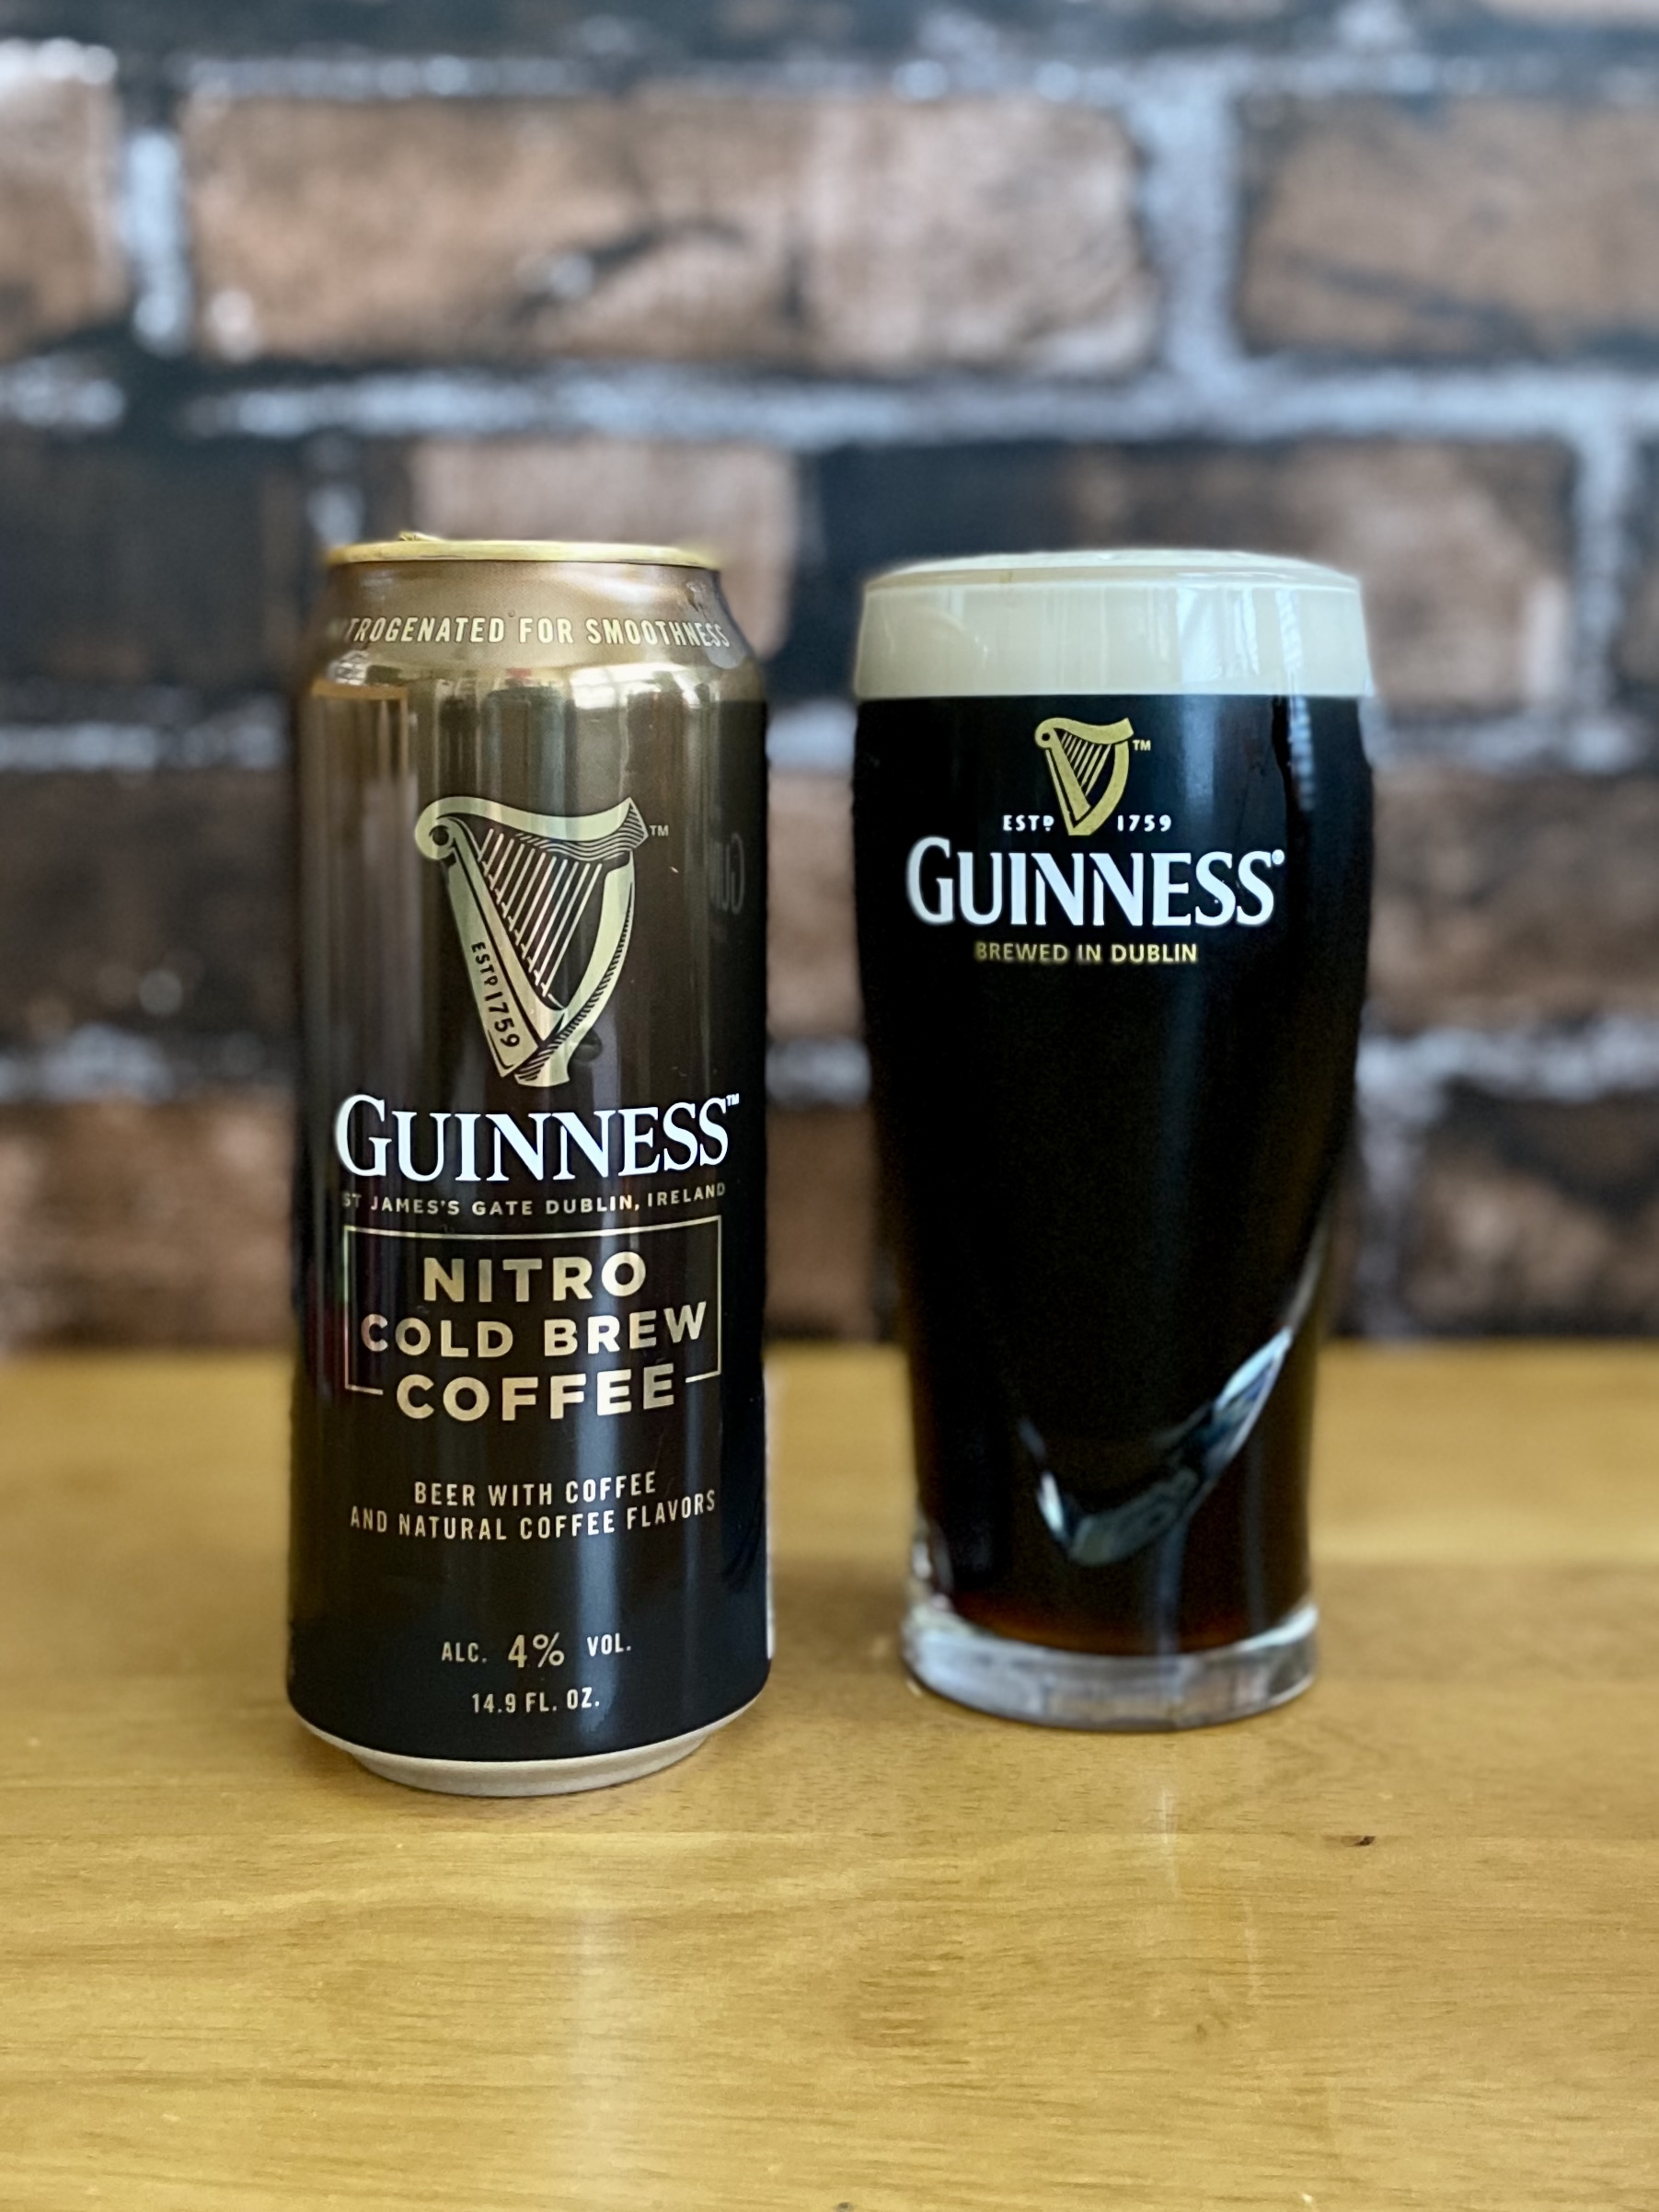 Guinness Nitro Cold Brew Coffee timely served on National Cold Brew Day.